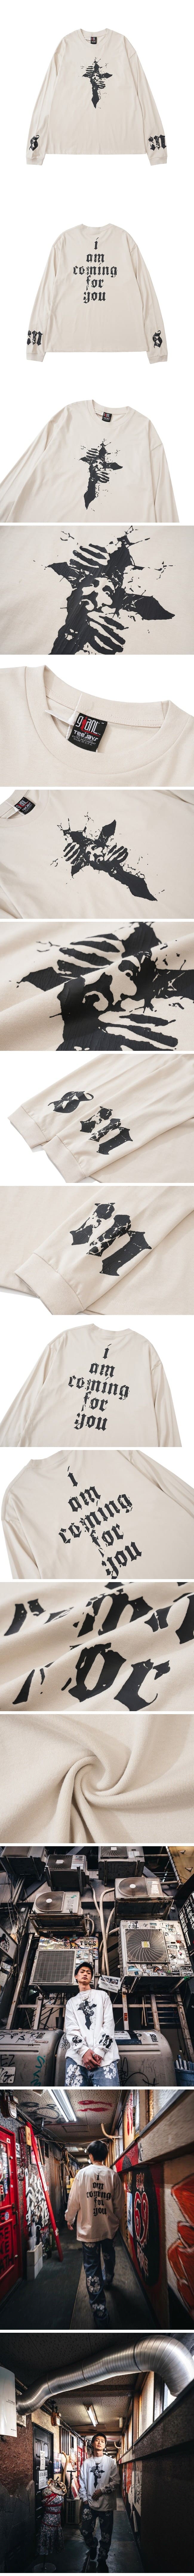 SAINT Mxxxxxx I am coming for you LS Tee セントマイケル ロンT